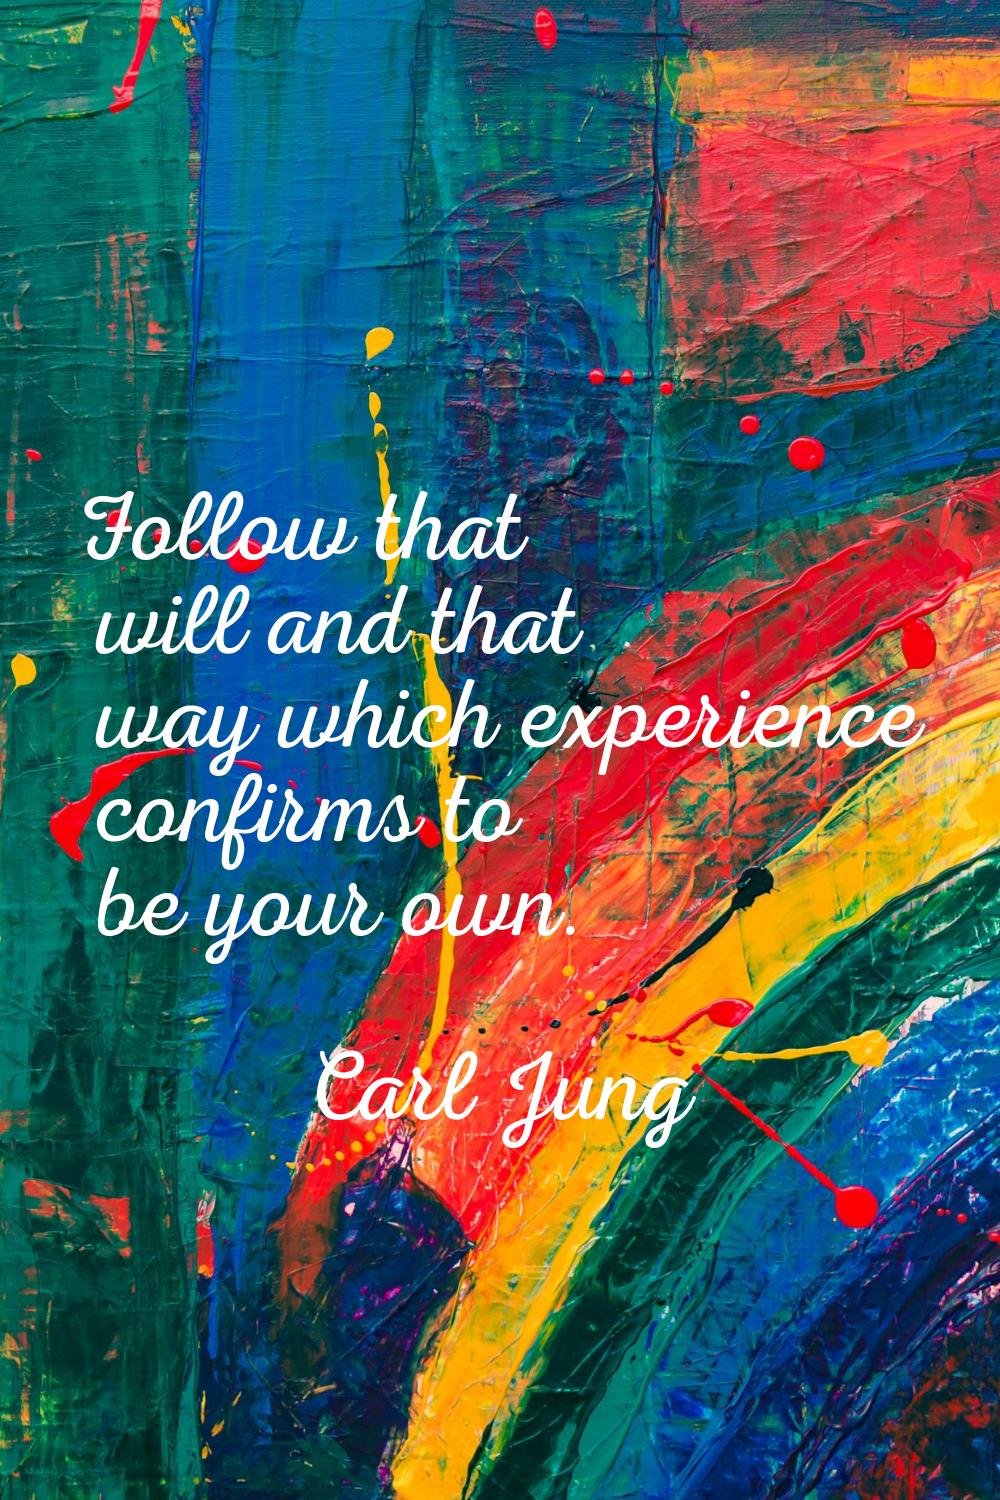 Follow that will and that way which experience confirms to be your own.